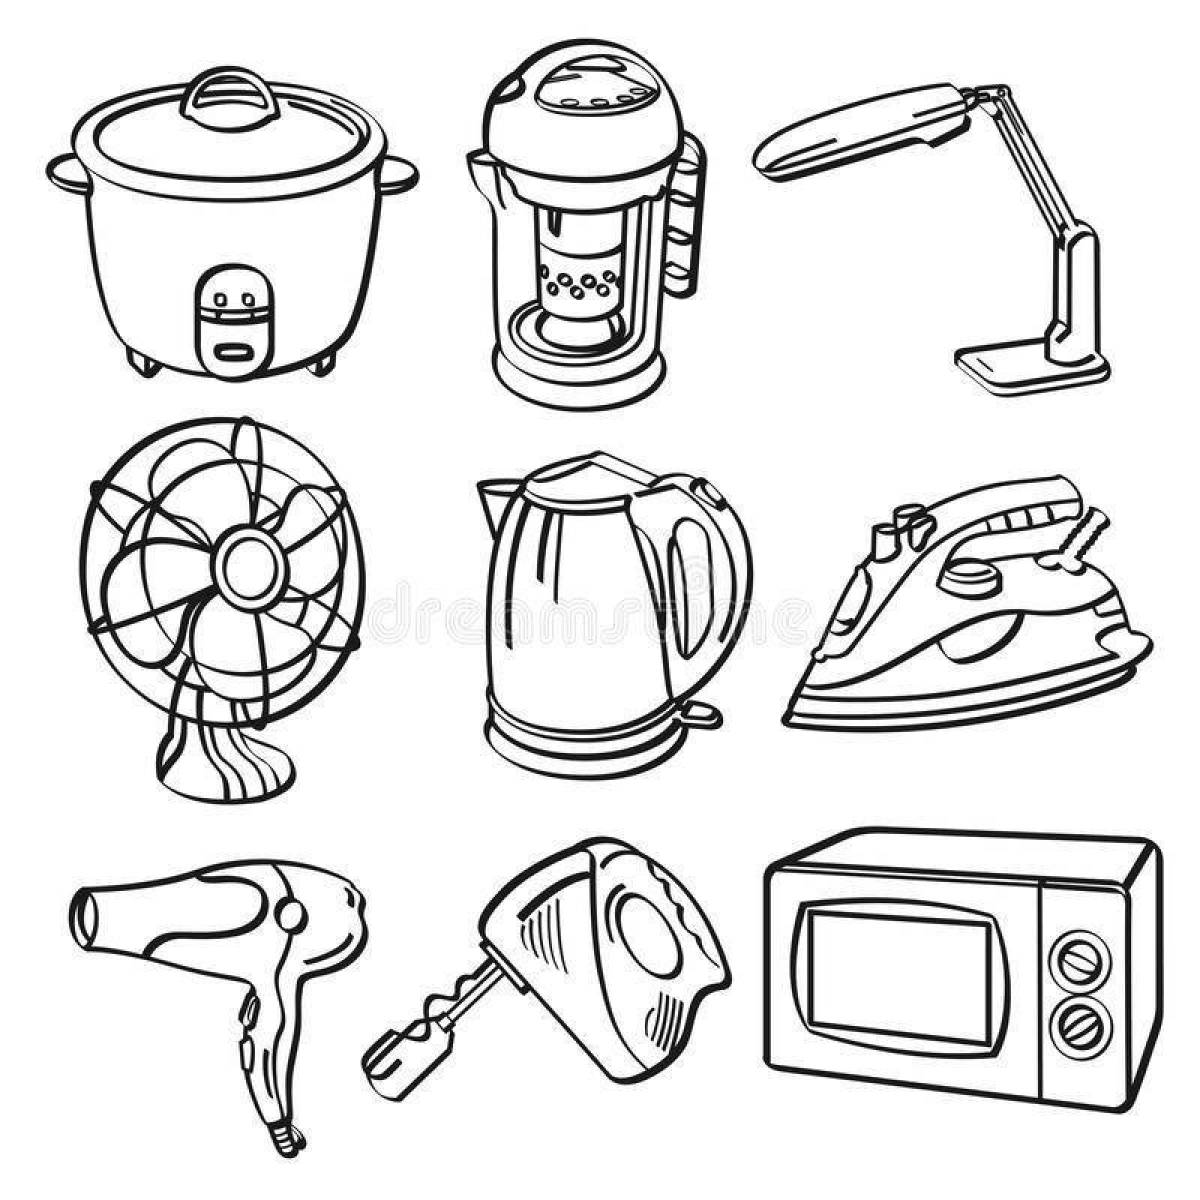 Radiant coloring page home appliances for teenagers